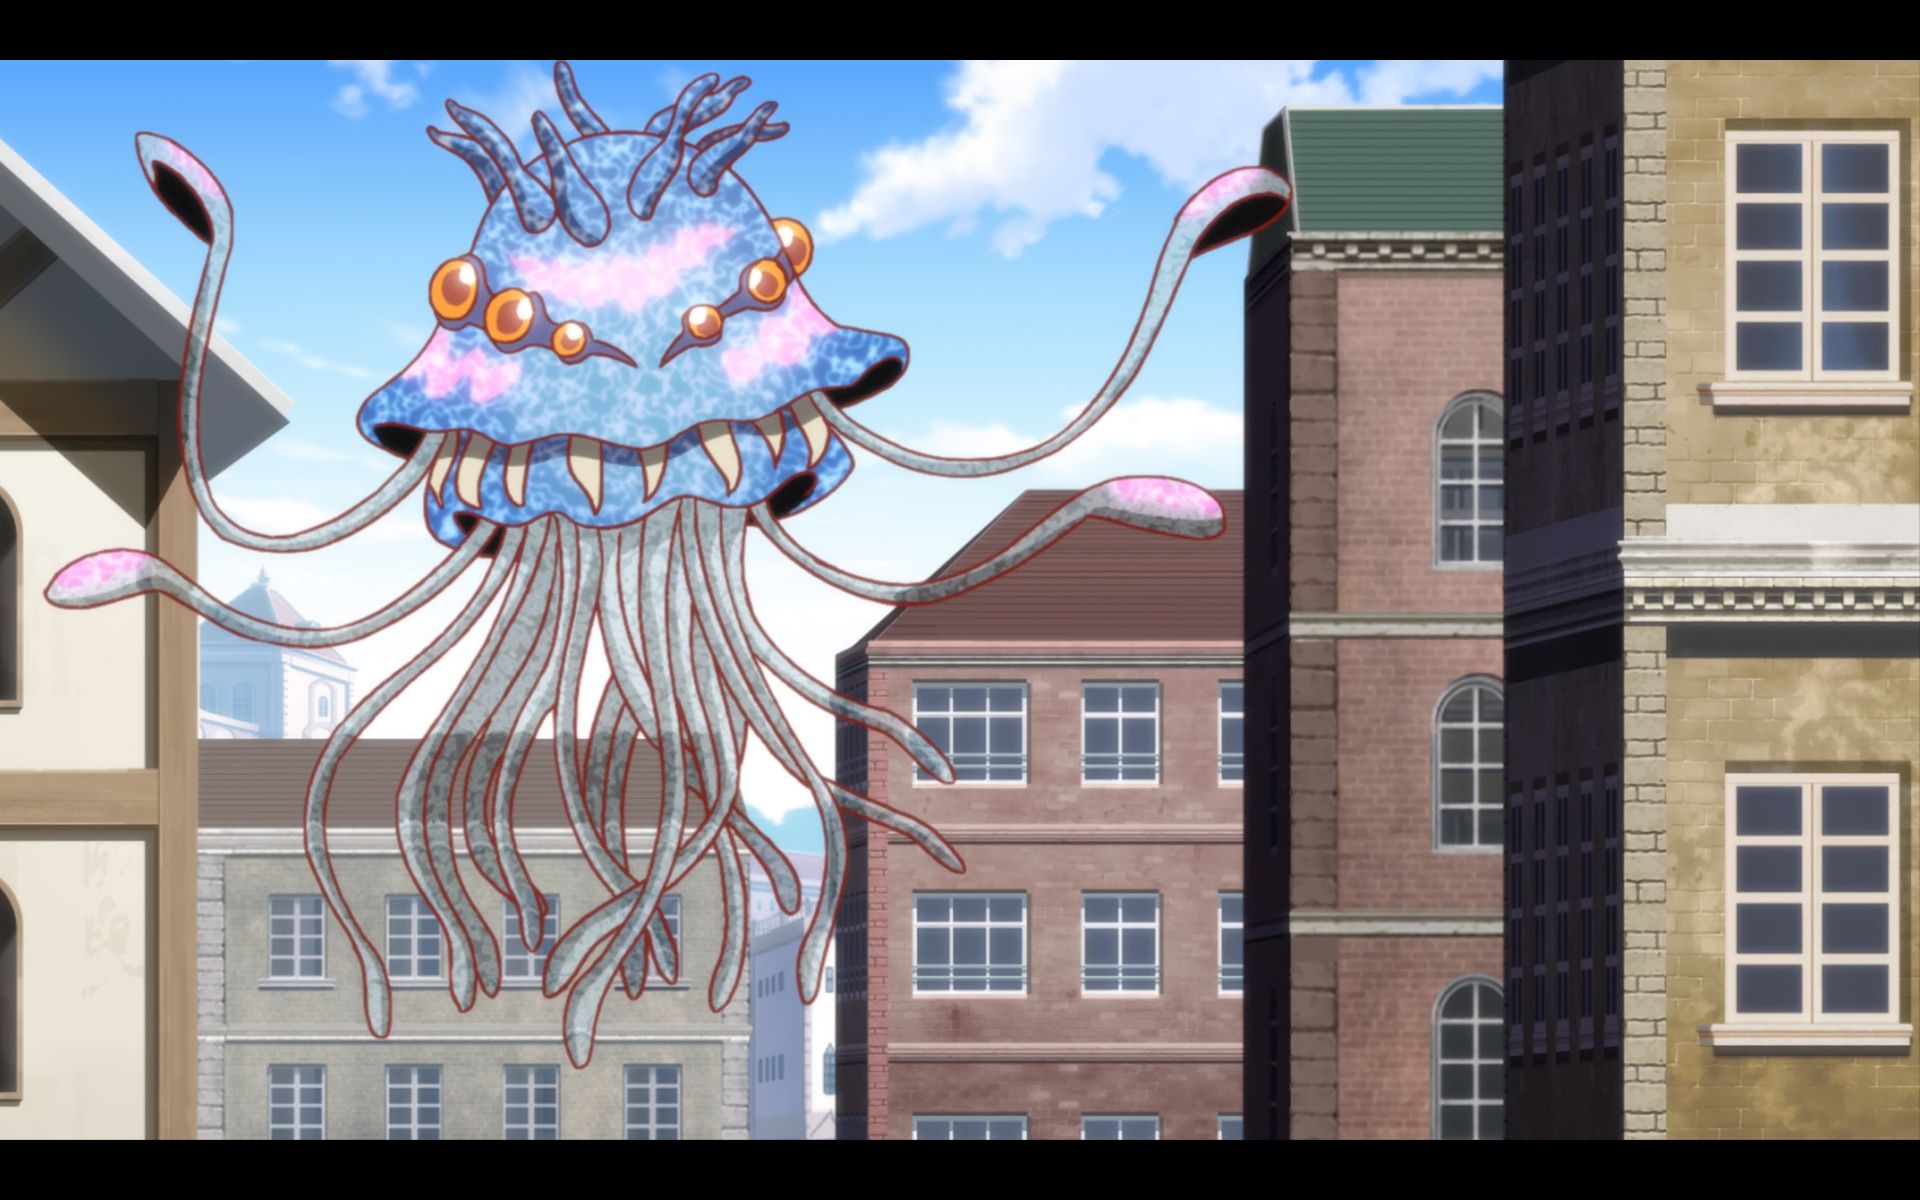 The 'final' boss of this anime.